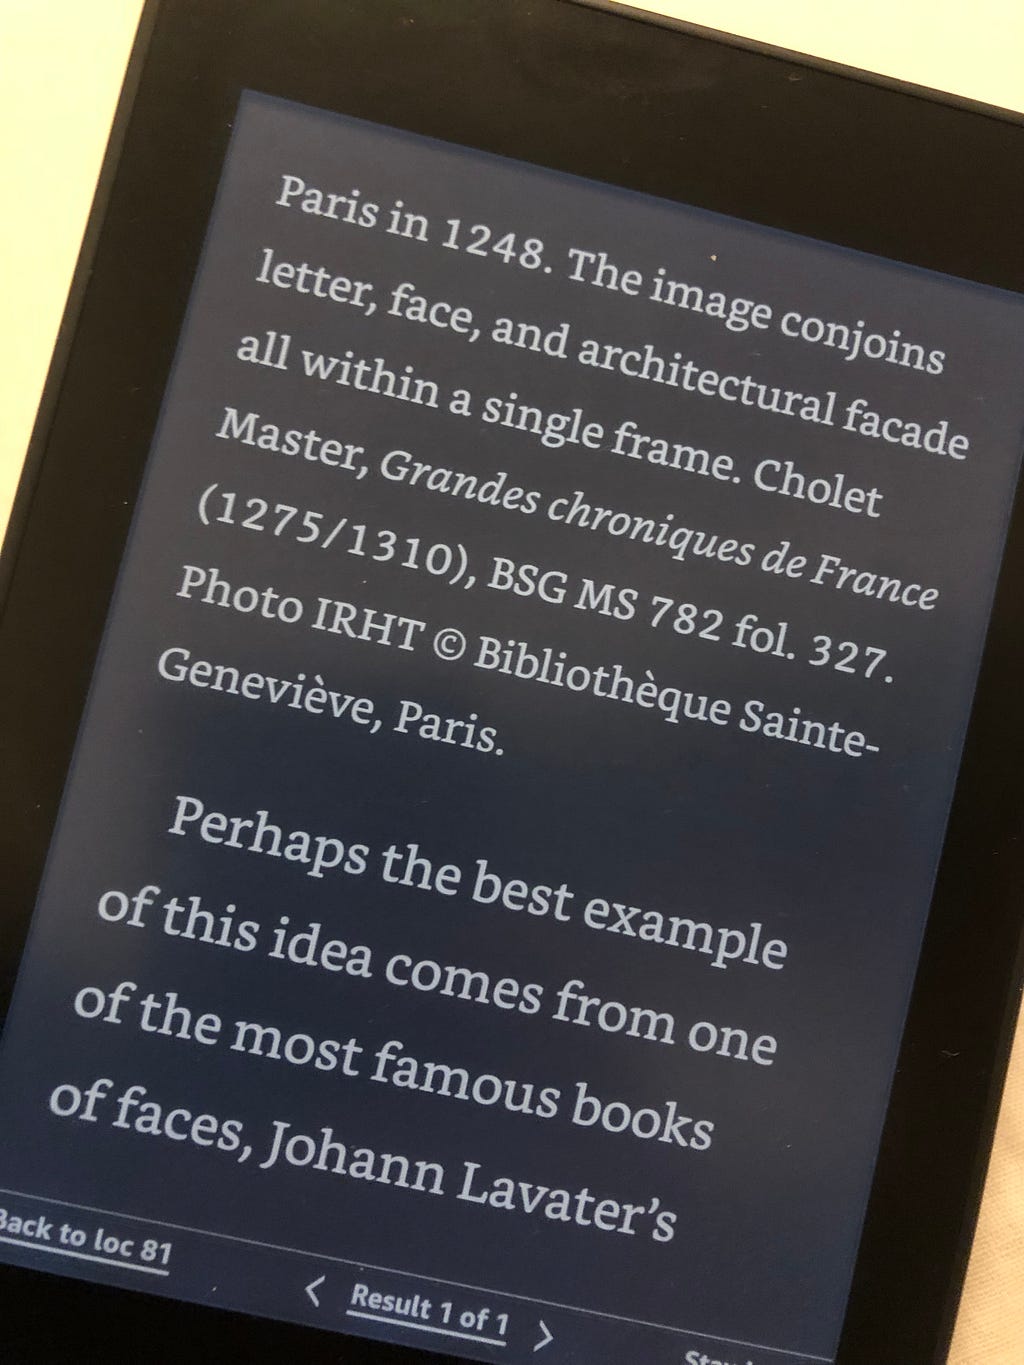 Image of a Kindle with large font settings.